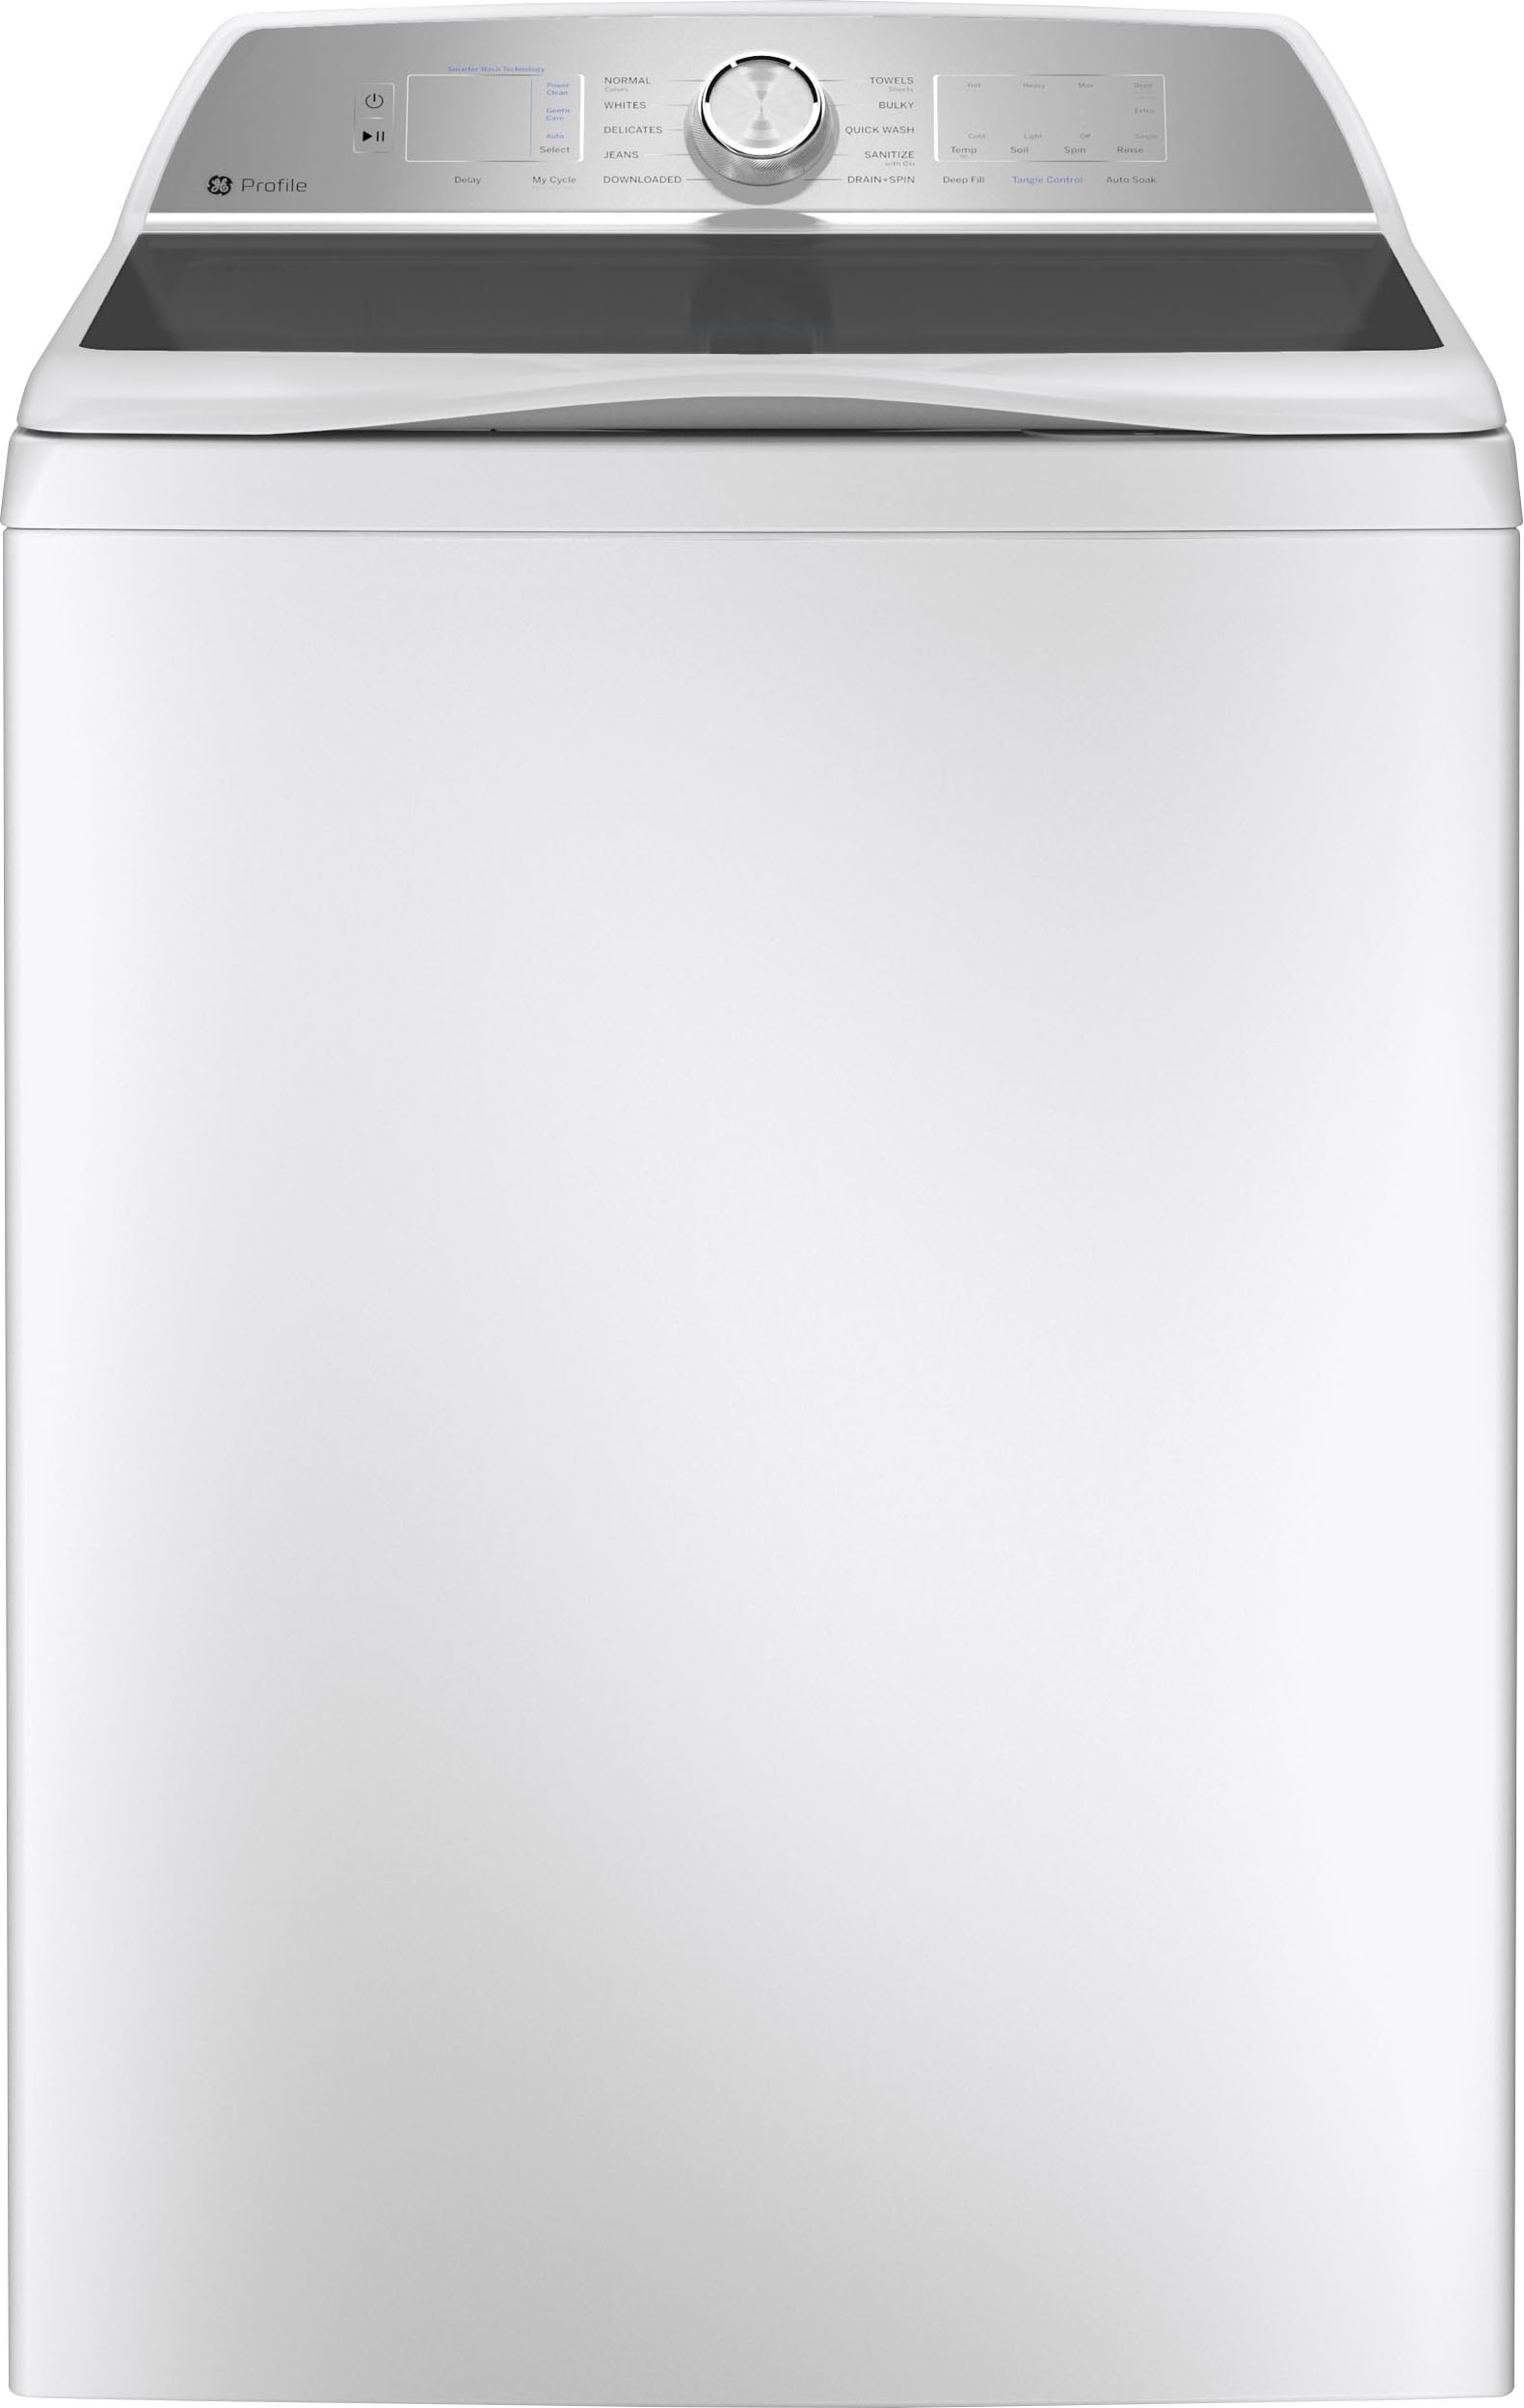 ge-profile-5-0-cu-ft-high-efficiency-smart-top-load-washer-with